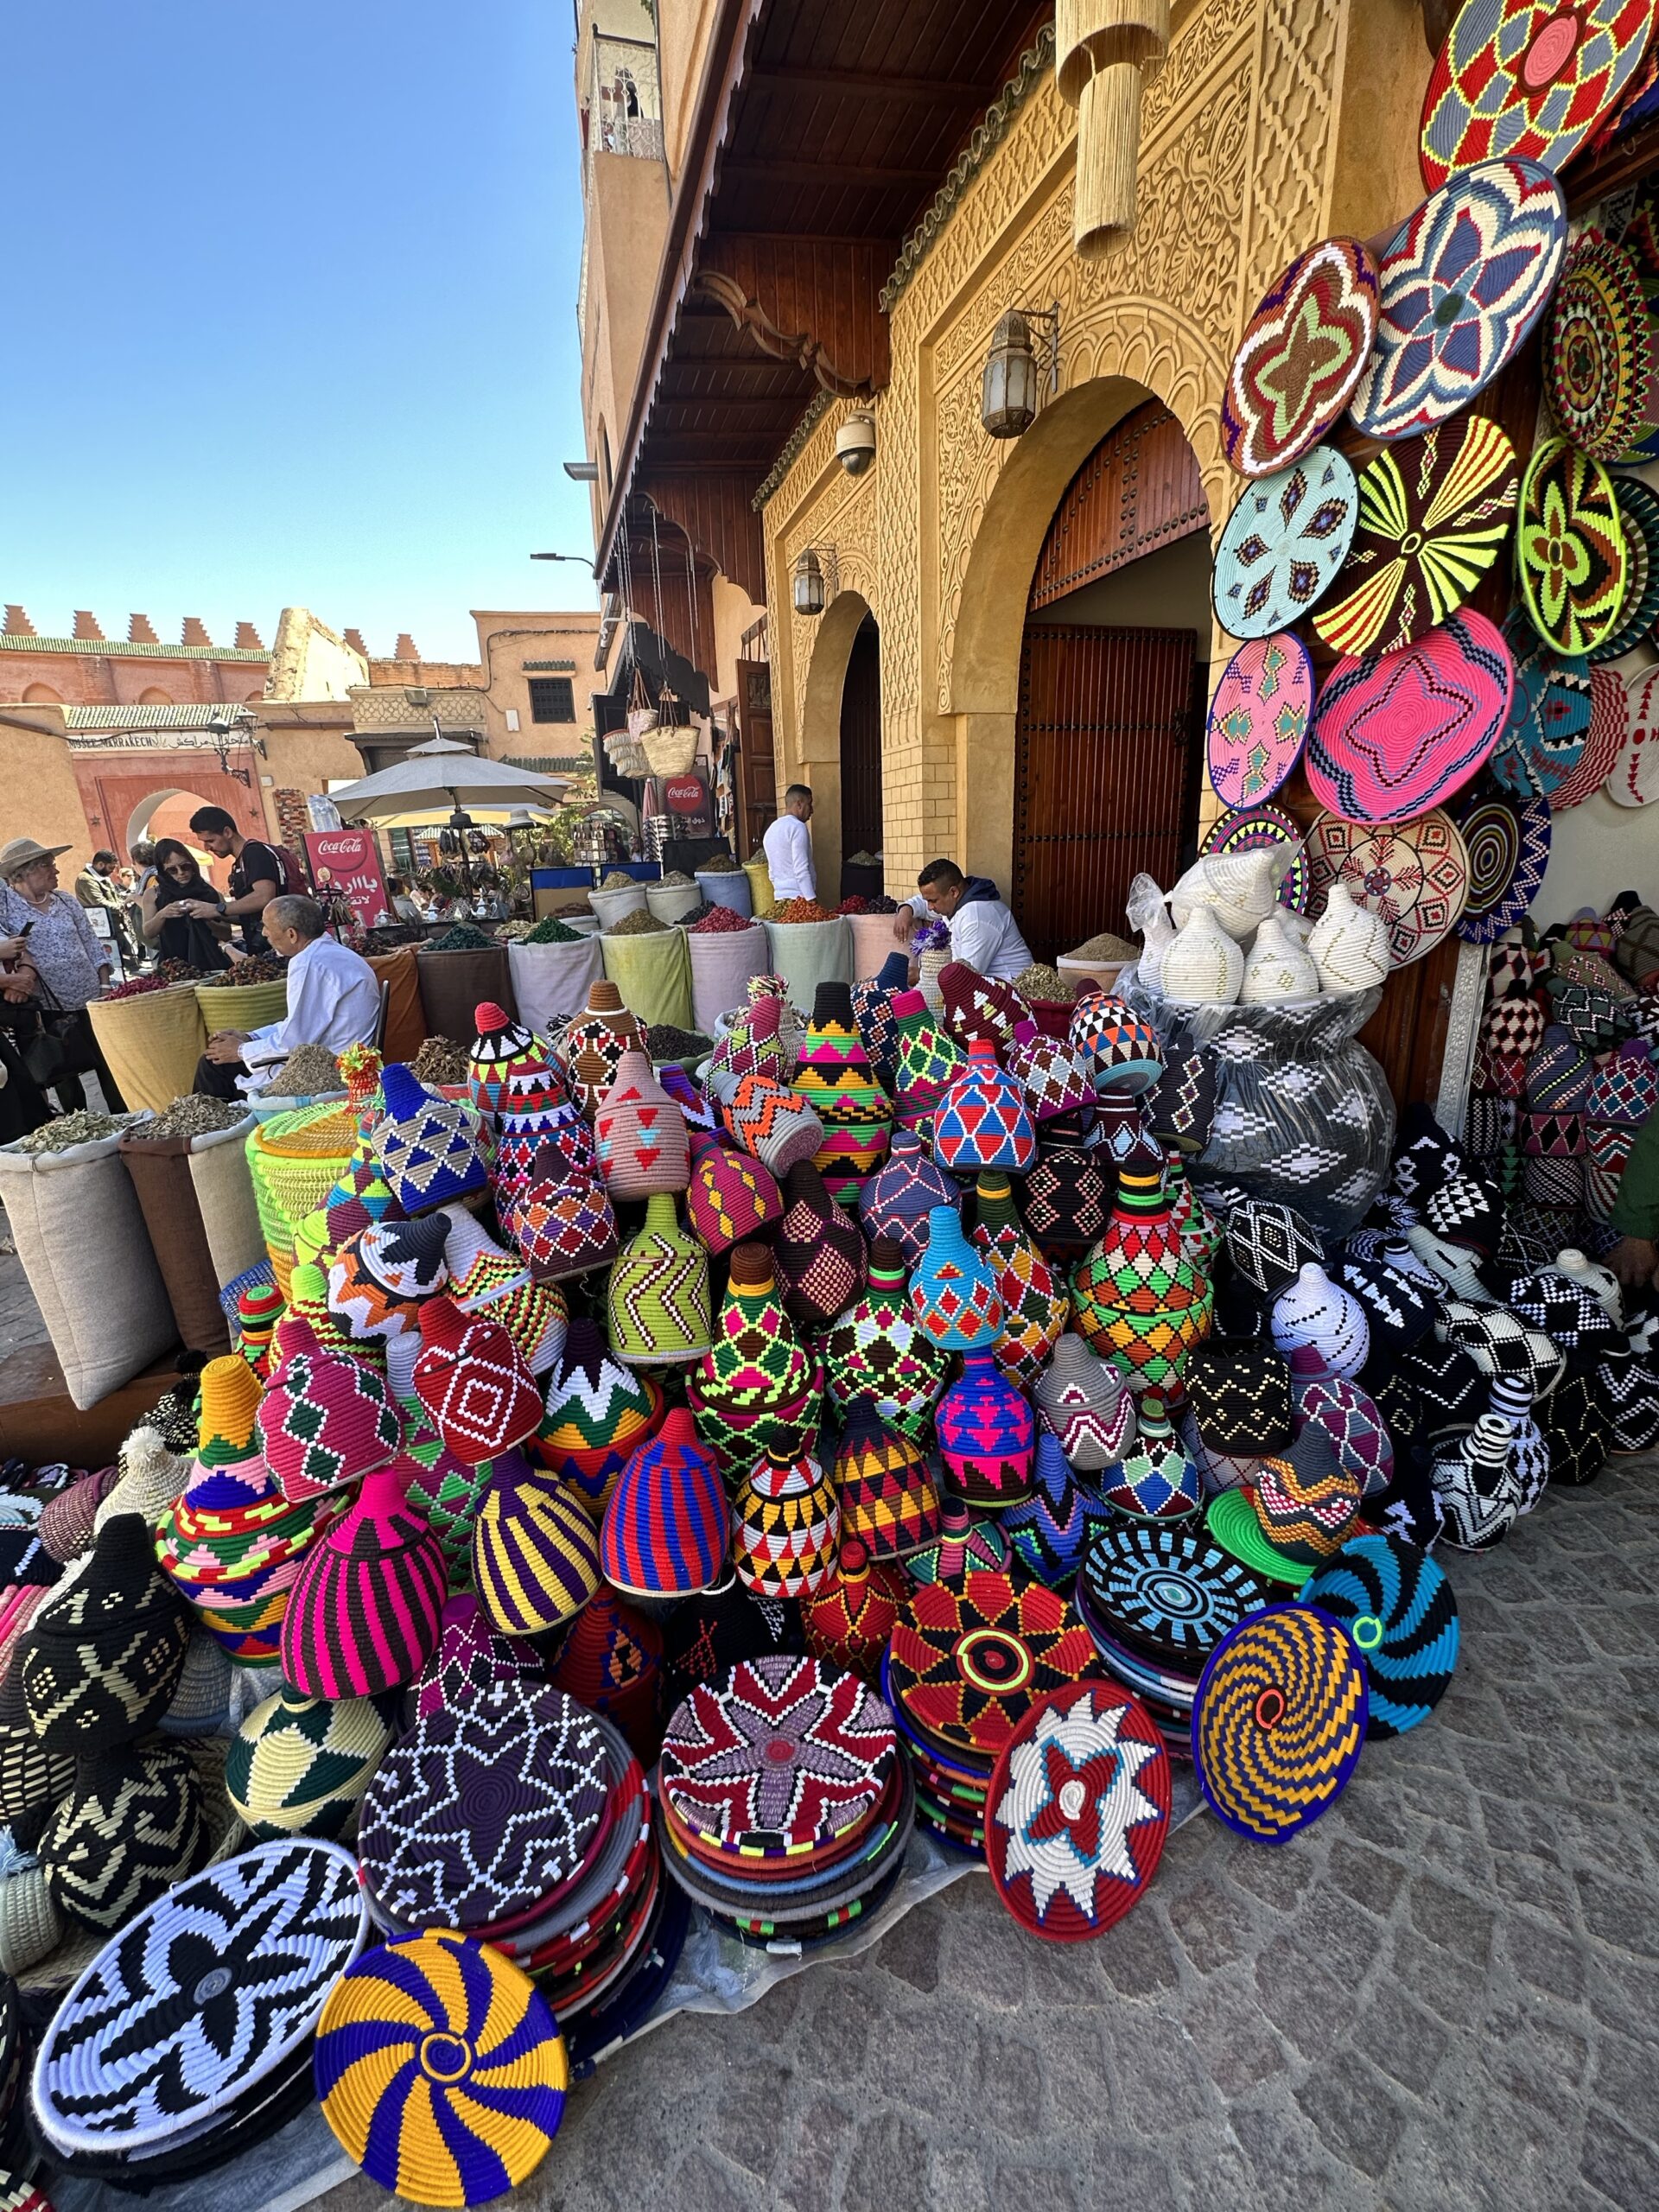 Euphoric Threads Travel Blog - Euphoric Escapades - The Adventures of Griffindor - The Ultimate Travel Guide to Shopping in Morocco. Marrakech colourful interiors